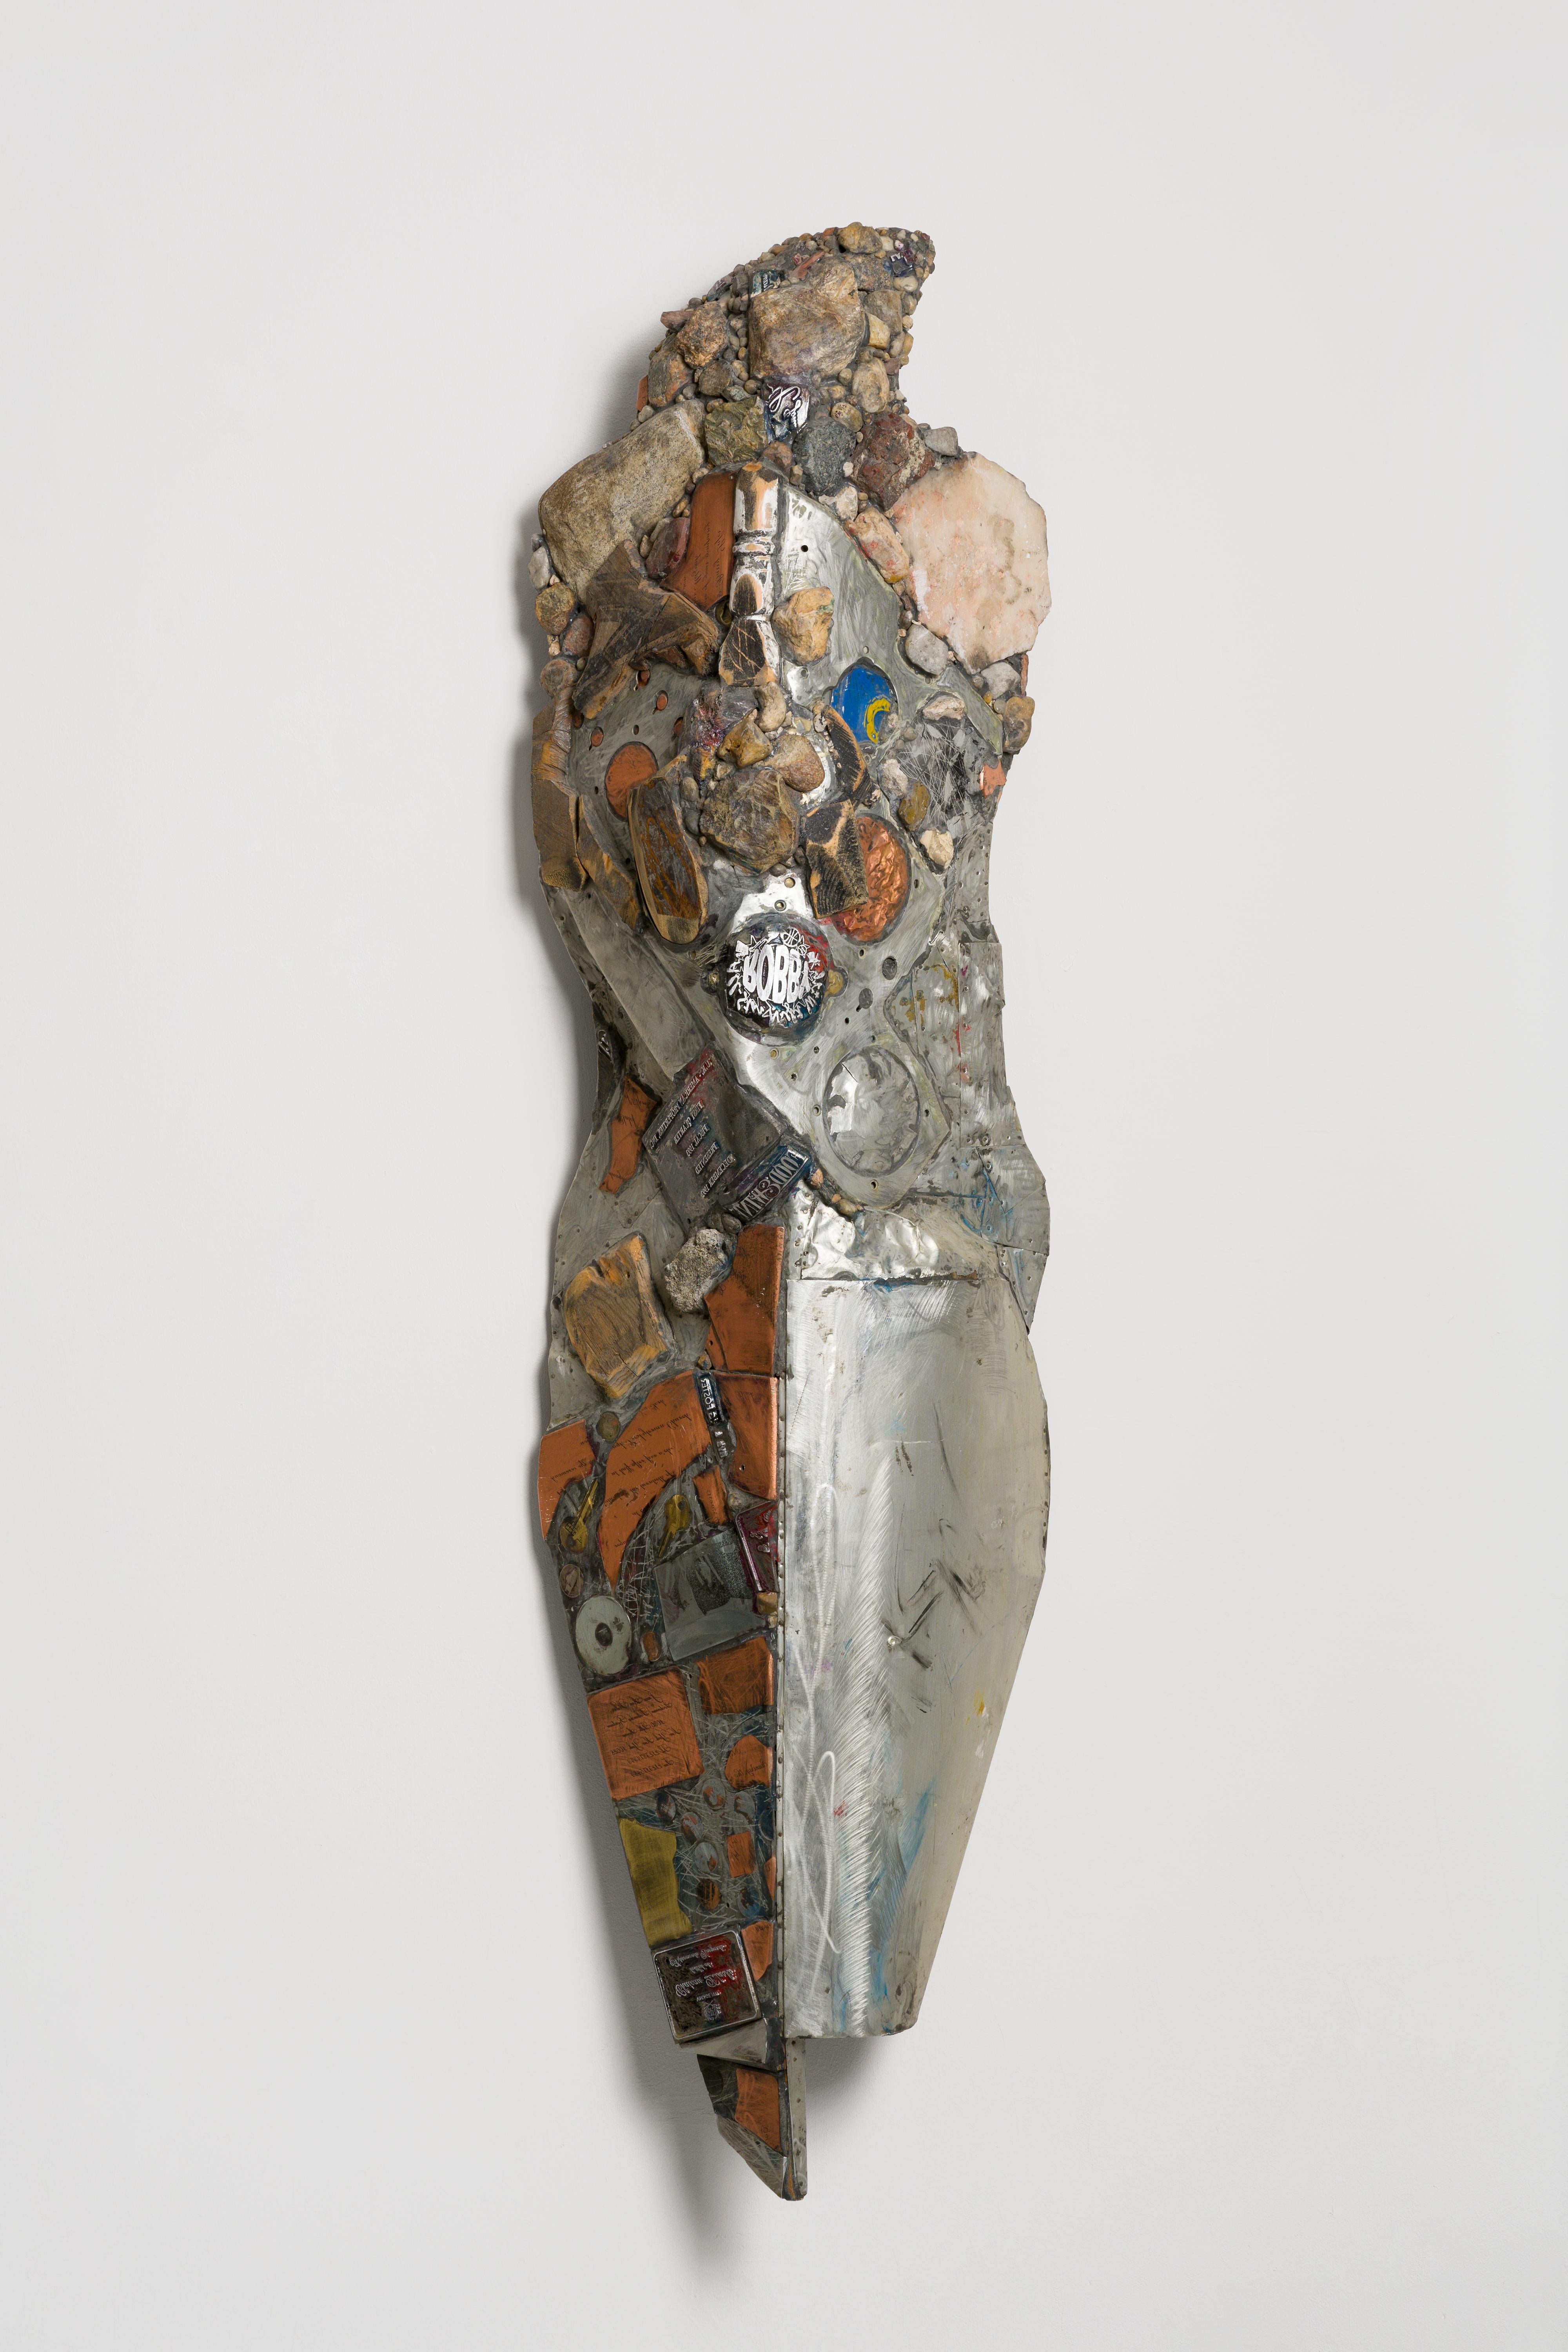 This sculpture from Linda Stein’s Knights of Protection series functions both as a defender in battle and a symbol of pacifism.  The series references popular and religious icons such as Wonder Woman, Princess Mononoke and the Buddhist goddess of